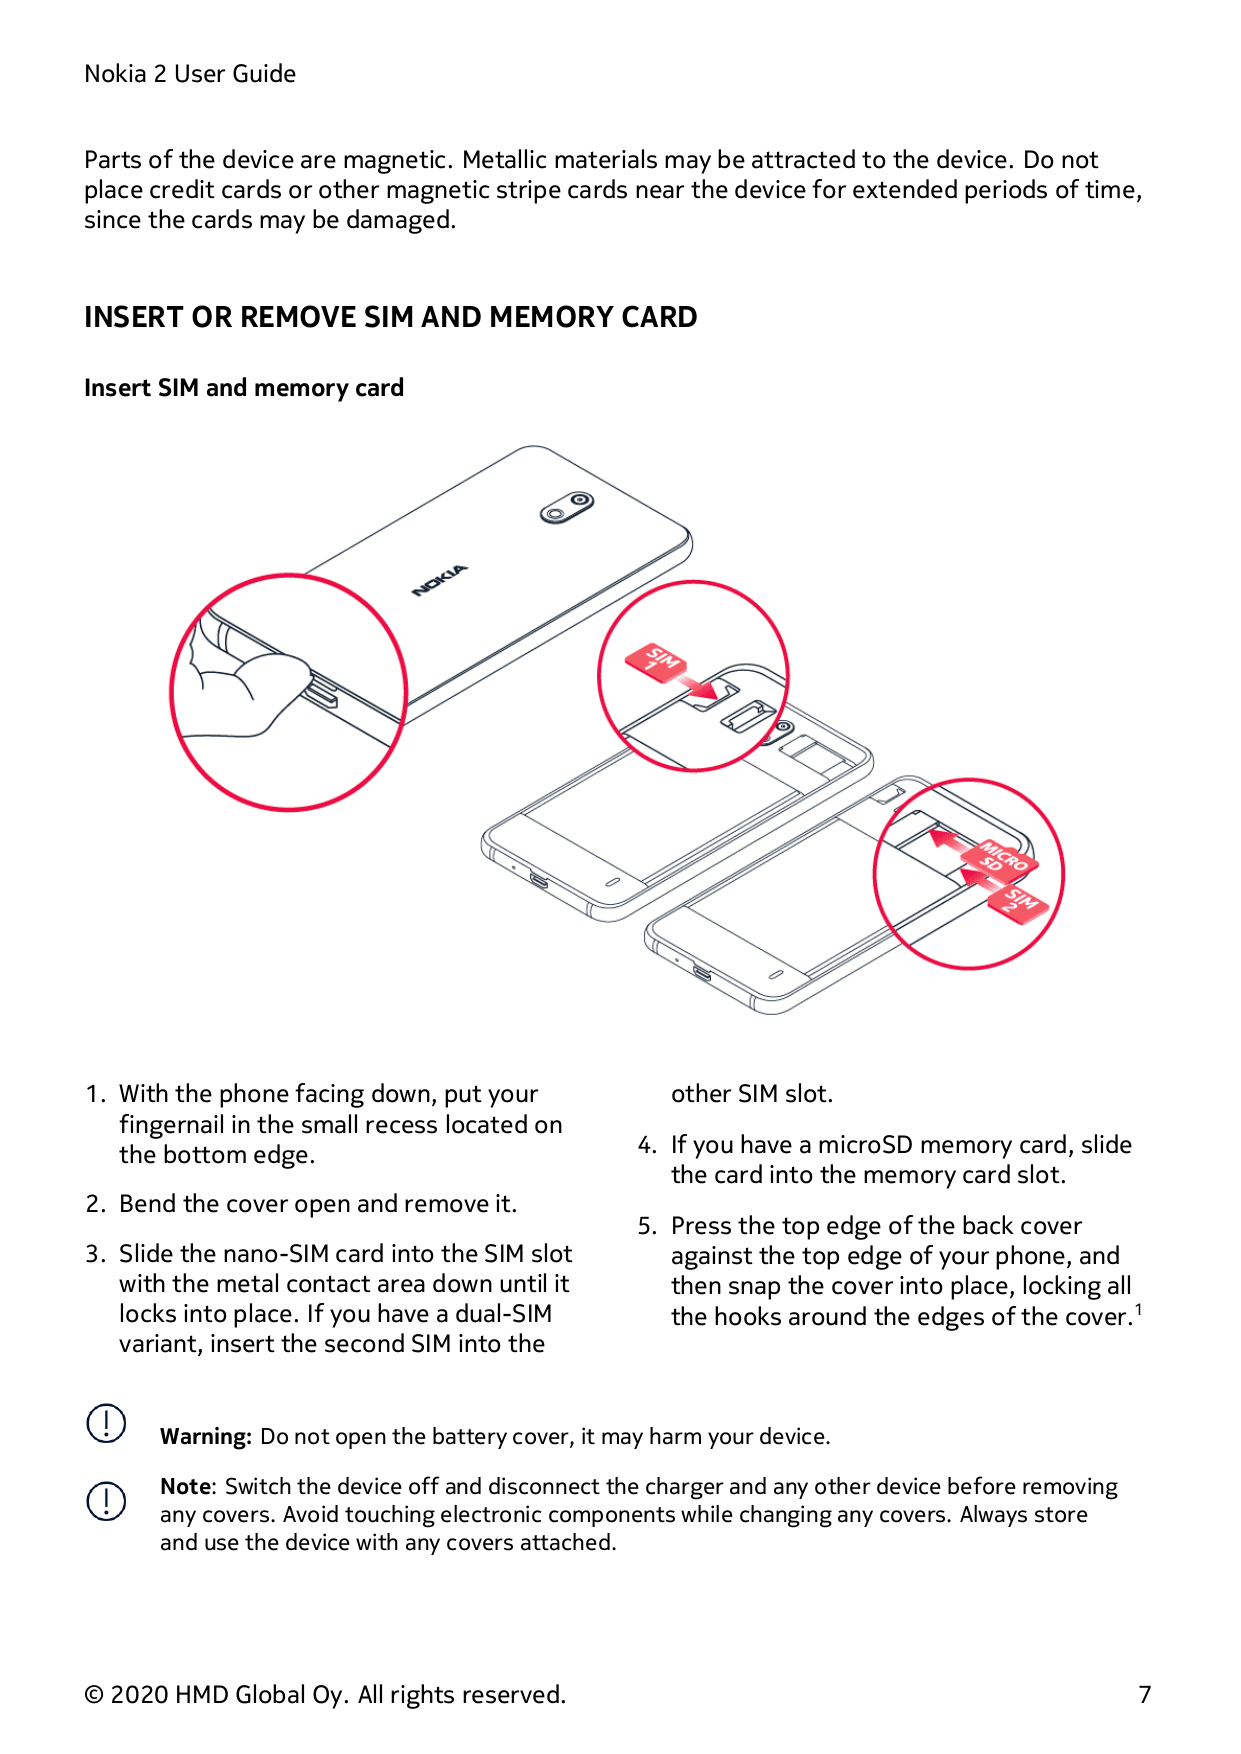 Nokia 2 User GuideParts of the device are magnetic. Metallic materials may be attracted to the device. Do notplace credit cards 